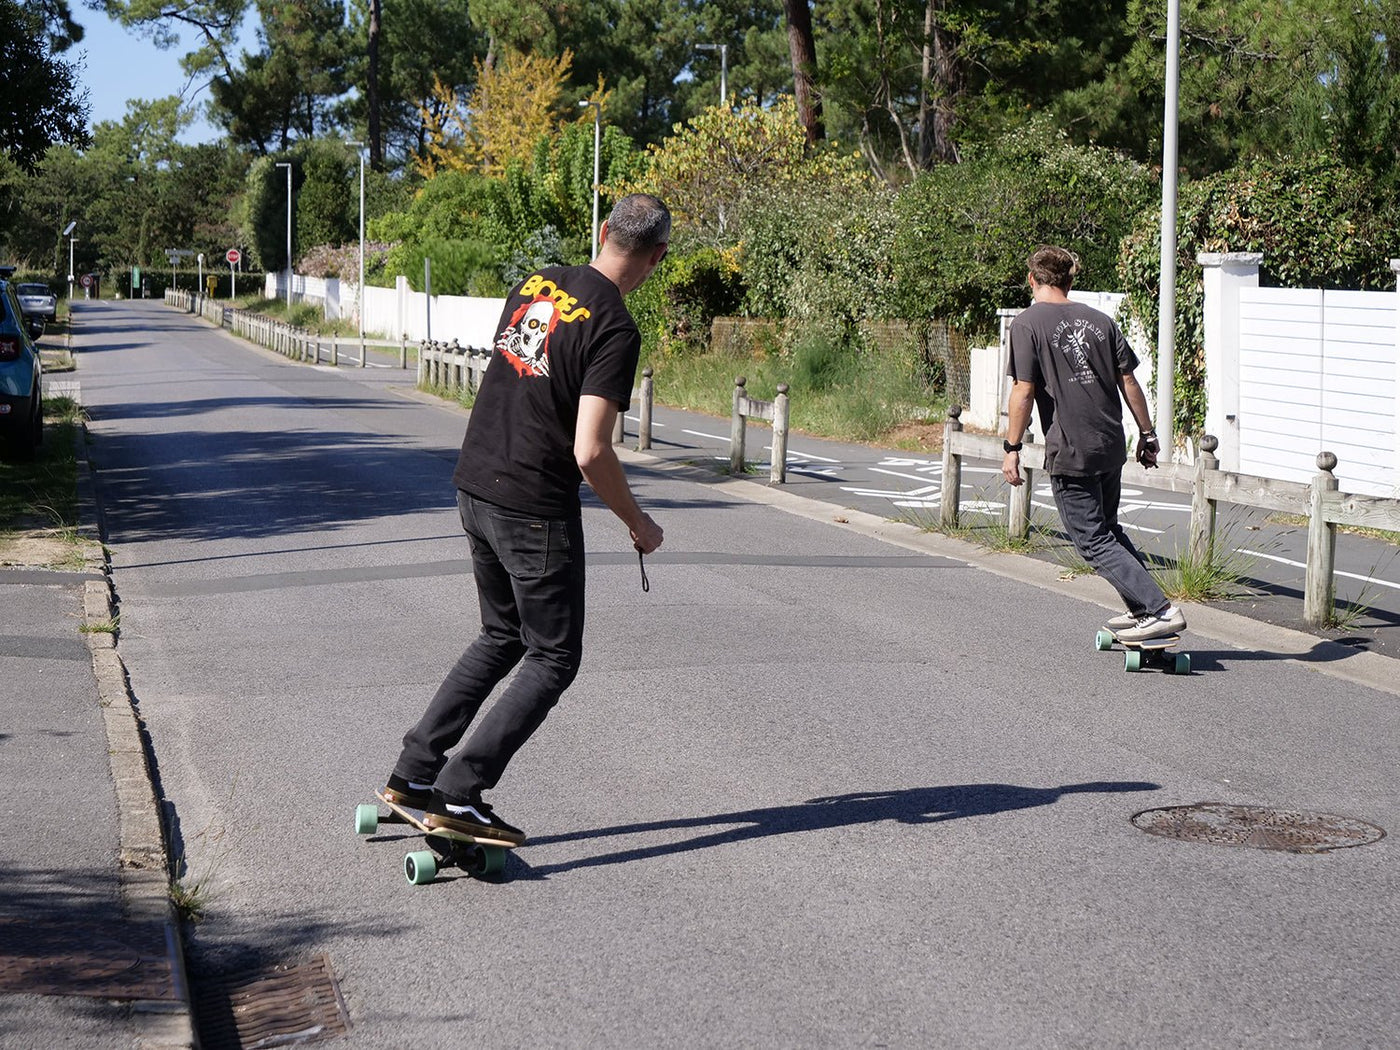 5 Good Reasons to Ride an Electric Skateboard : A modern urban mobility option - Voltaway